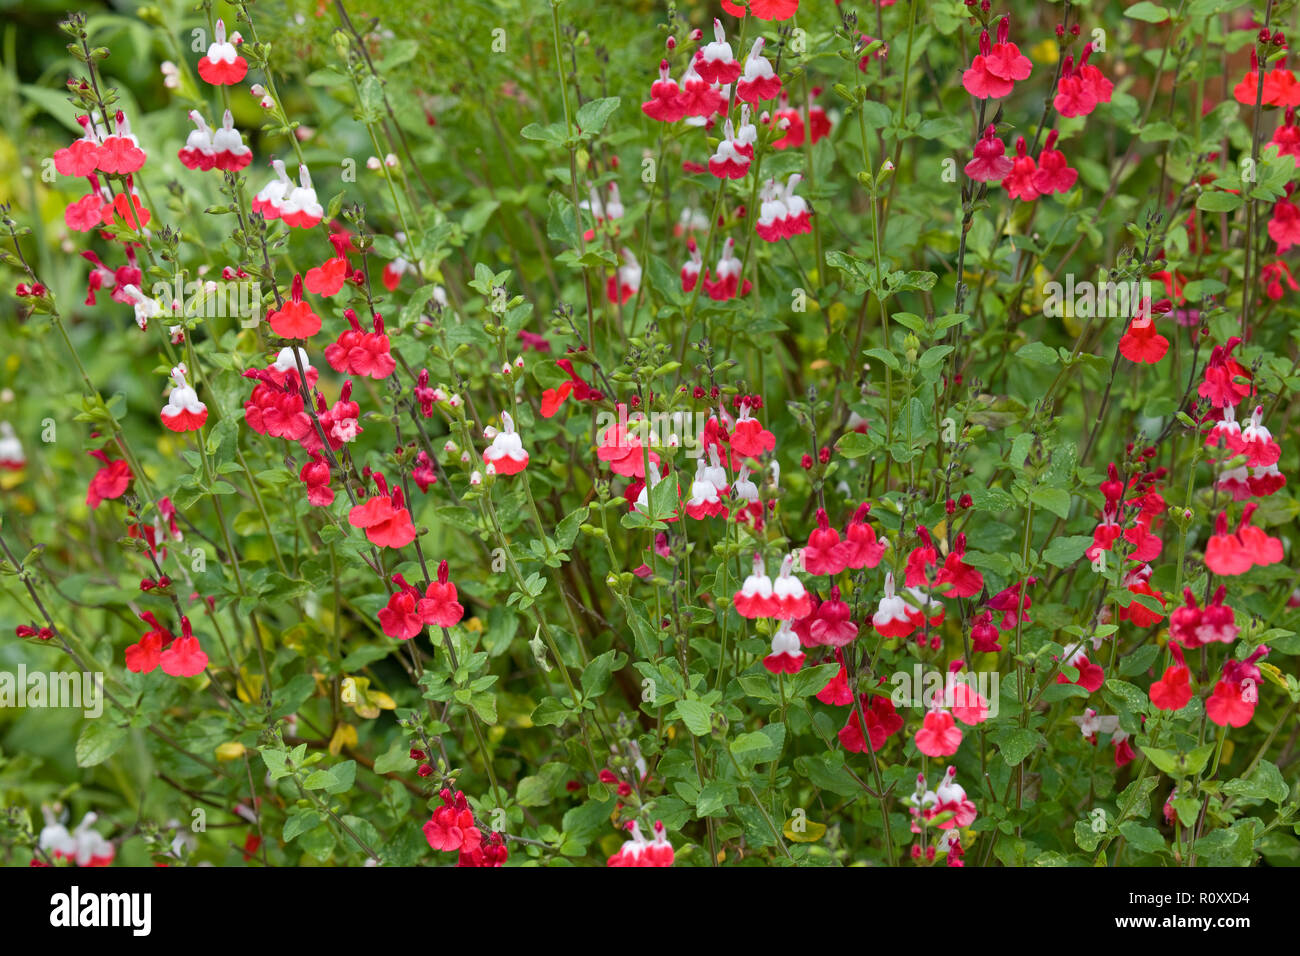 Salvia microphylla Hot Lips flowering plant Banque D'Images